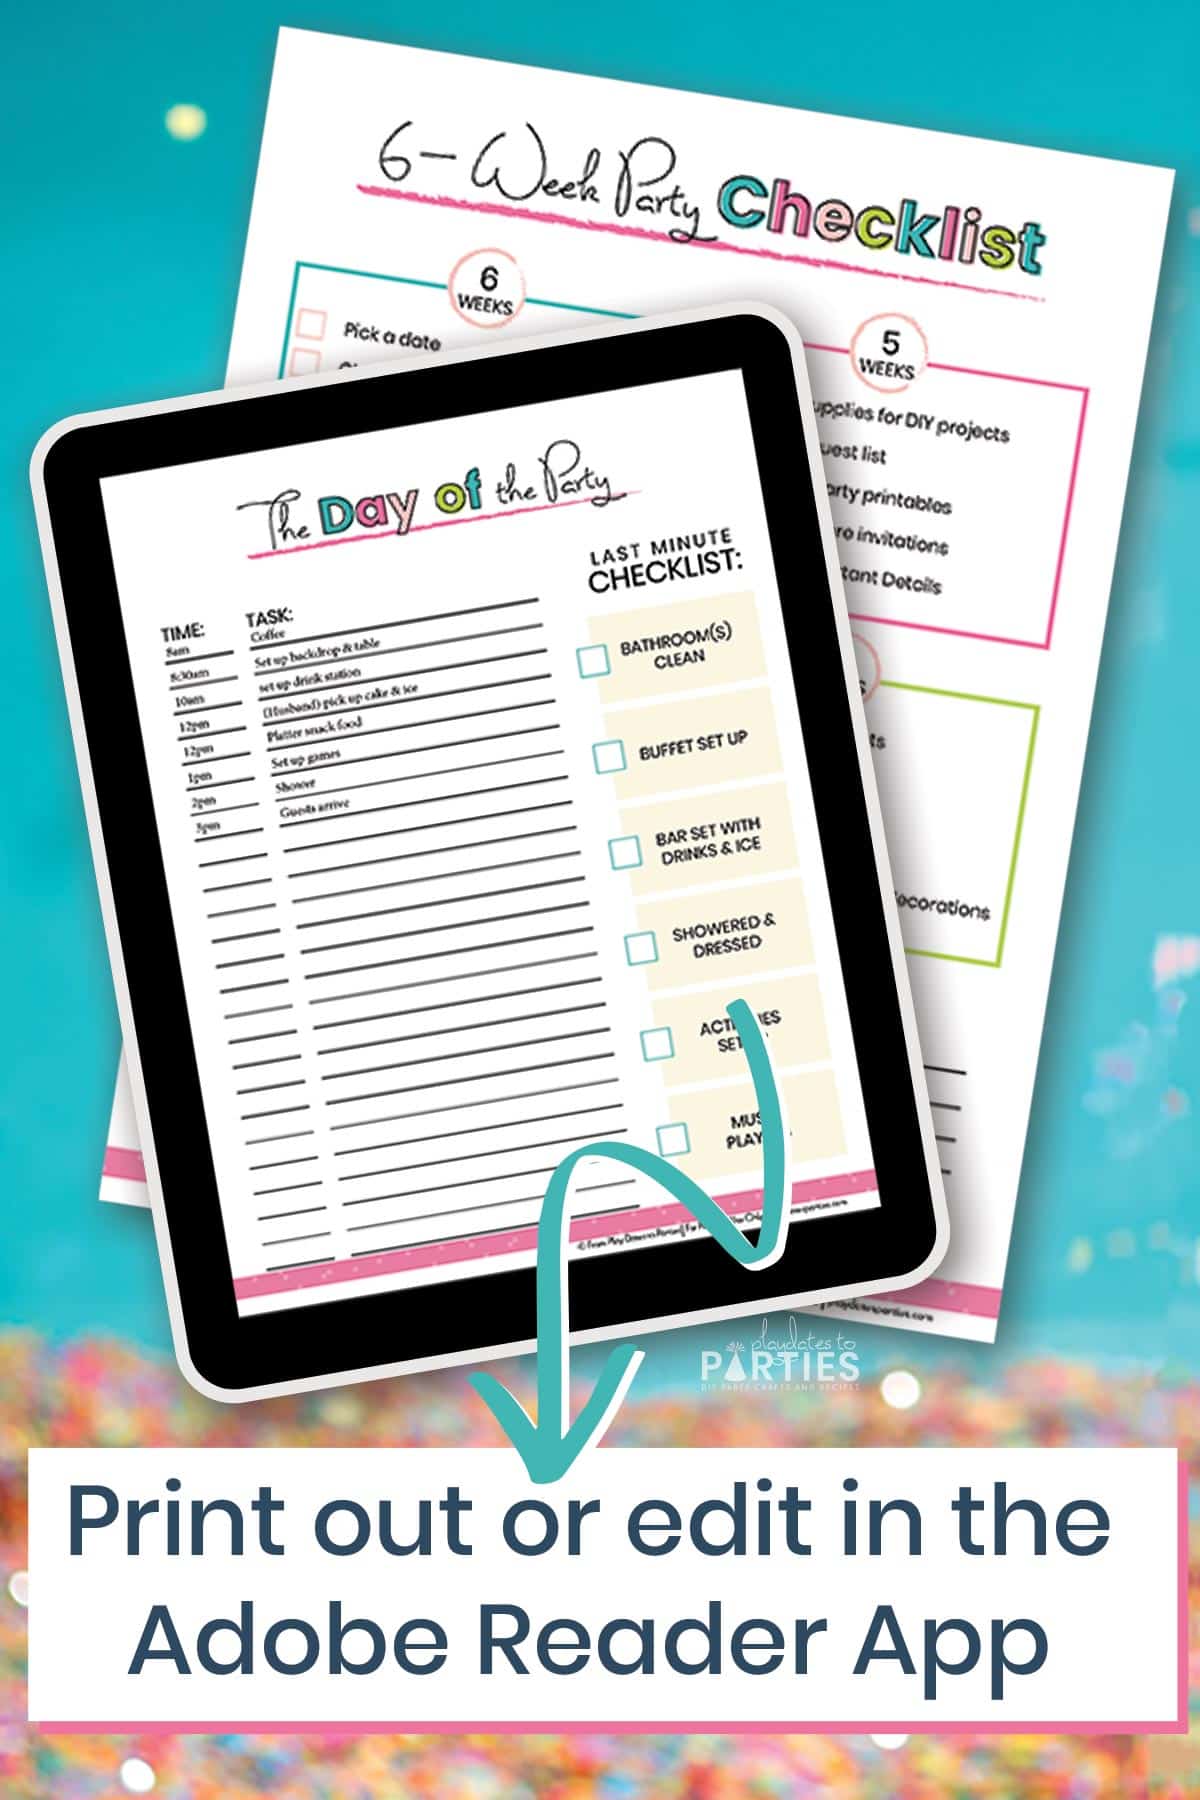 Party Planning Timeline and Checklists